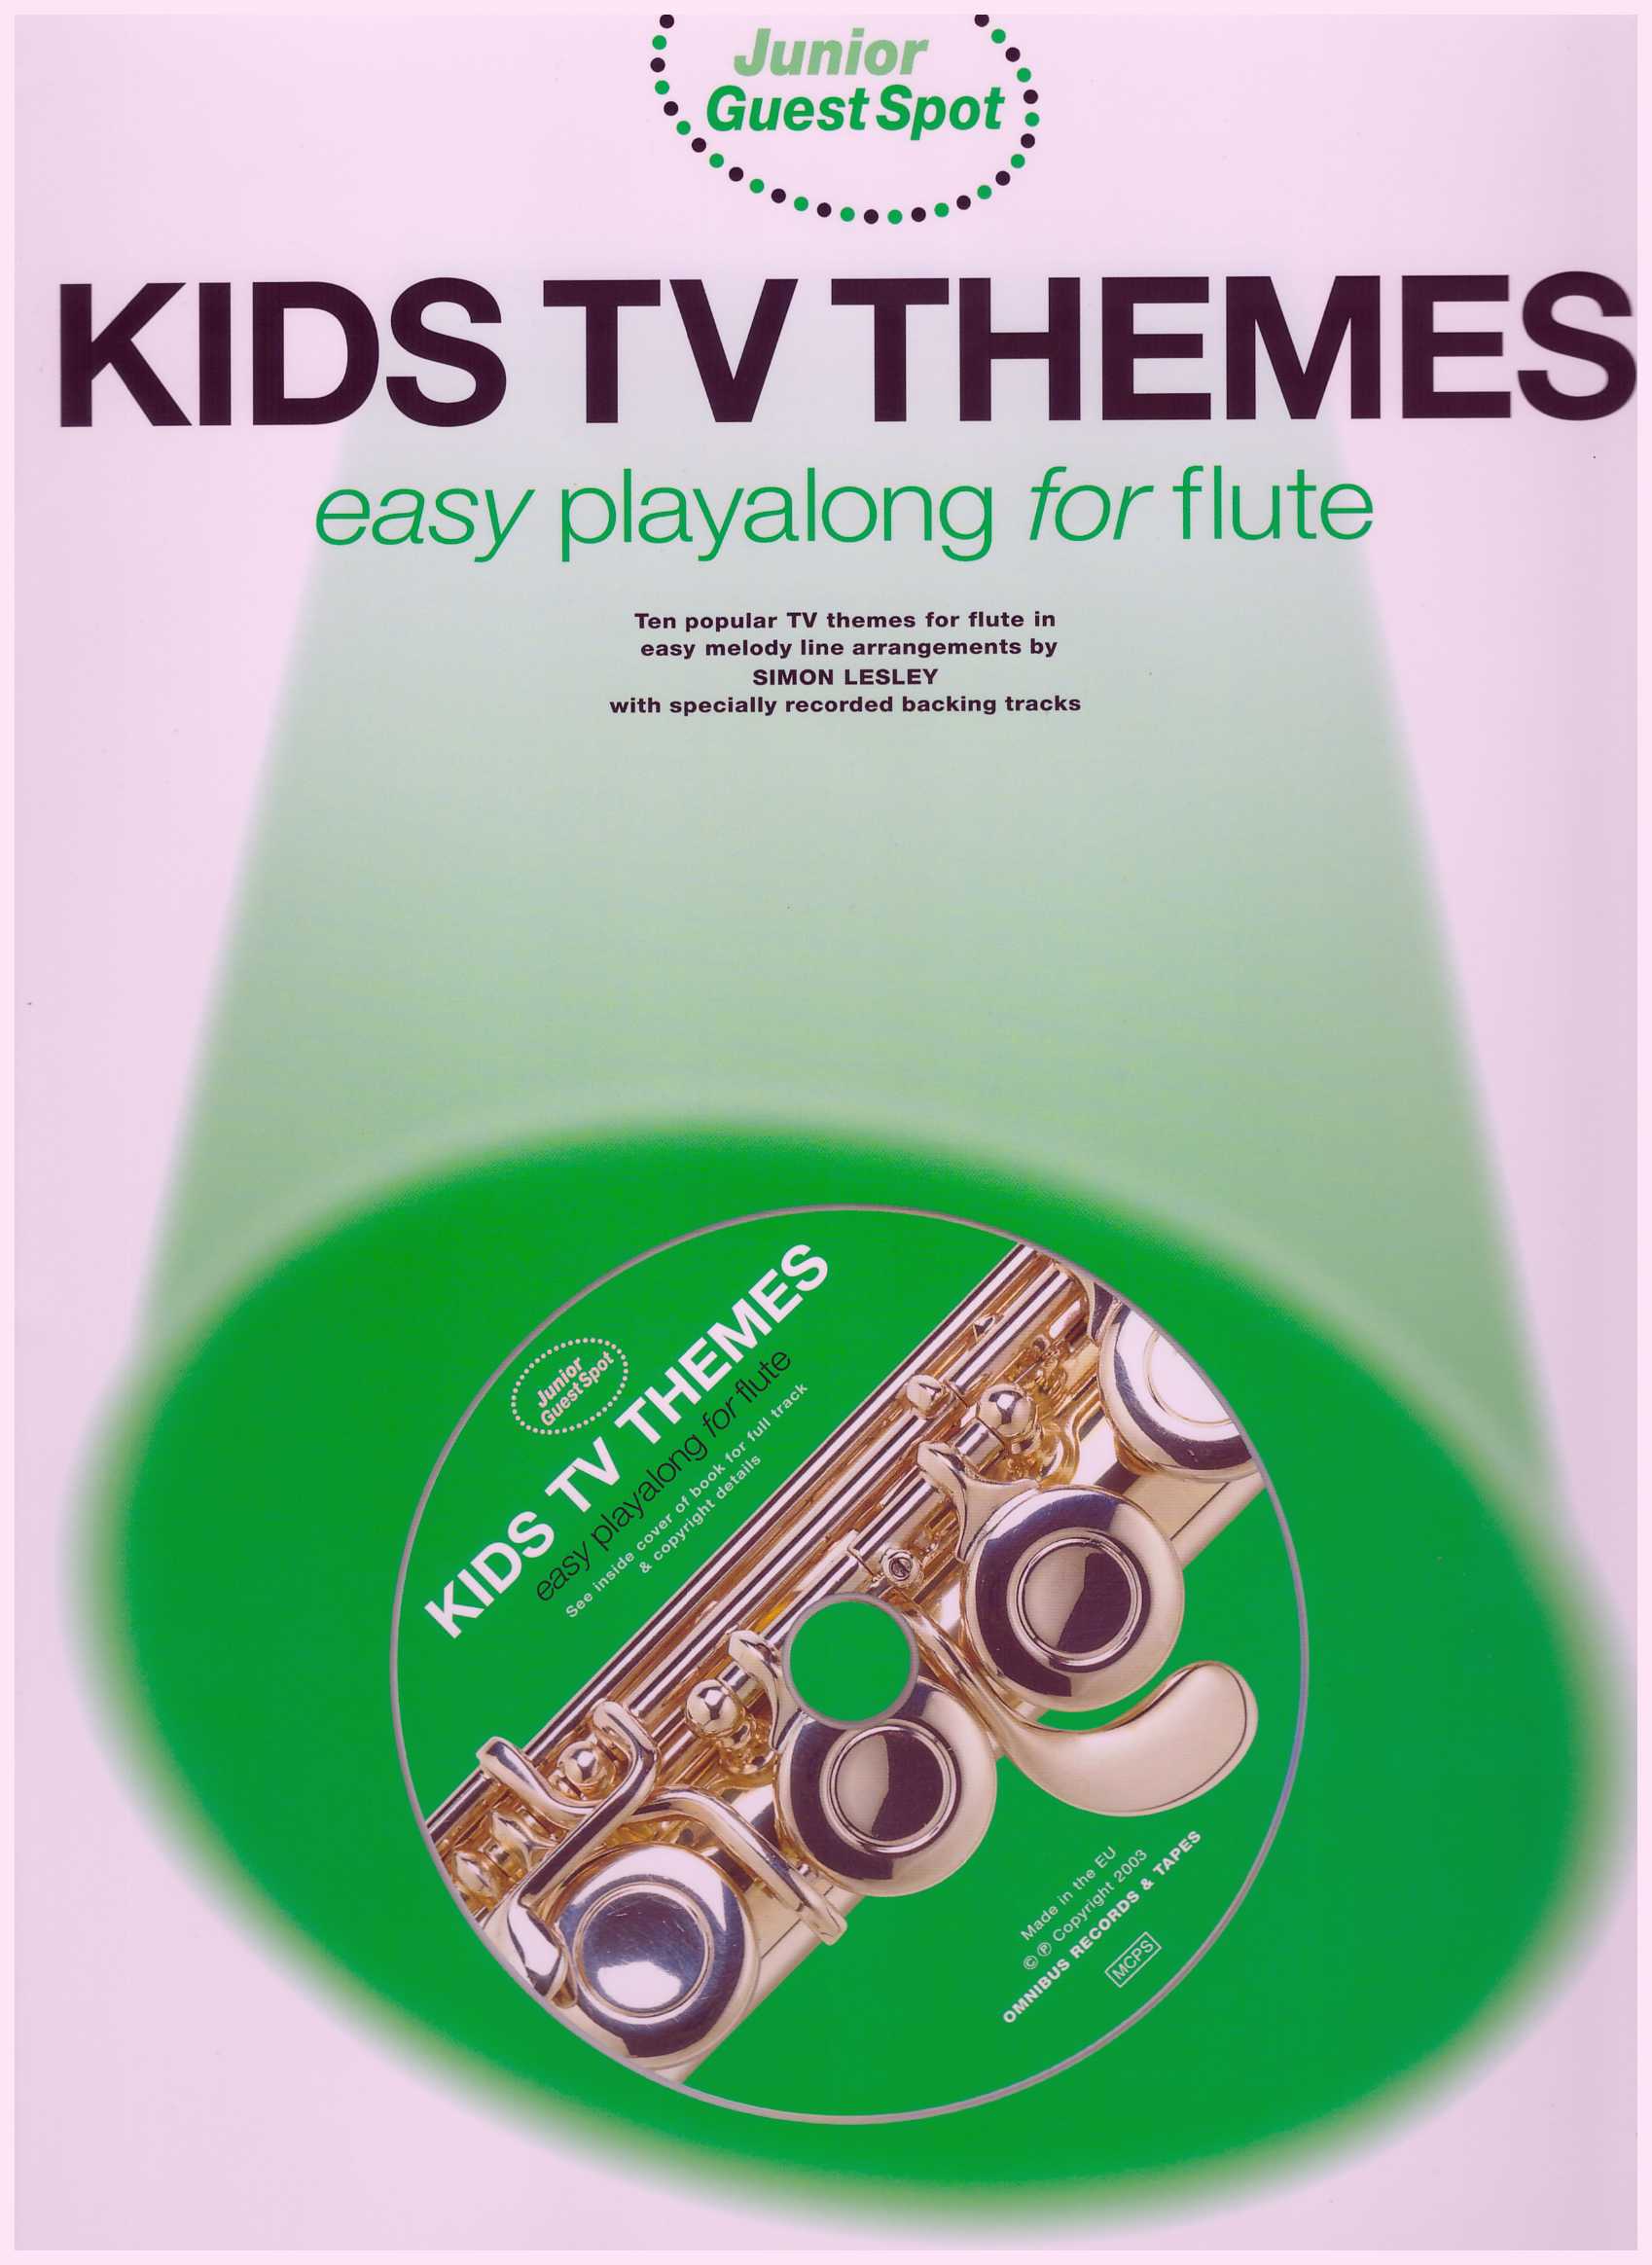 Kids TV Themes Easy Playalong For Flute / Flute Book / TV Themes Book / Beginner Book